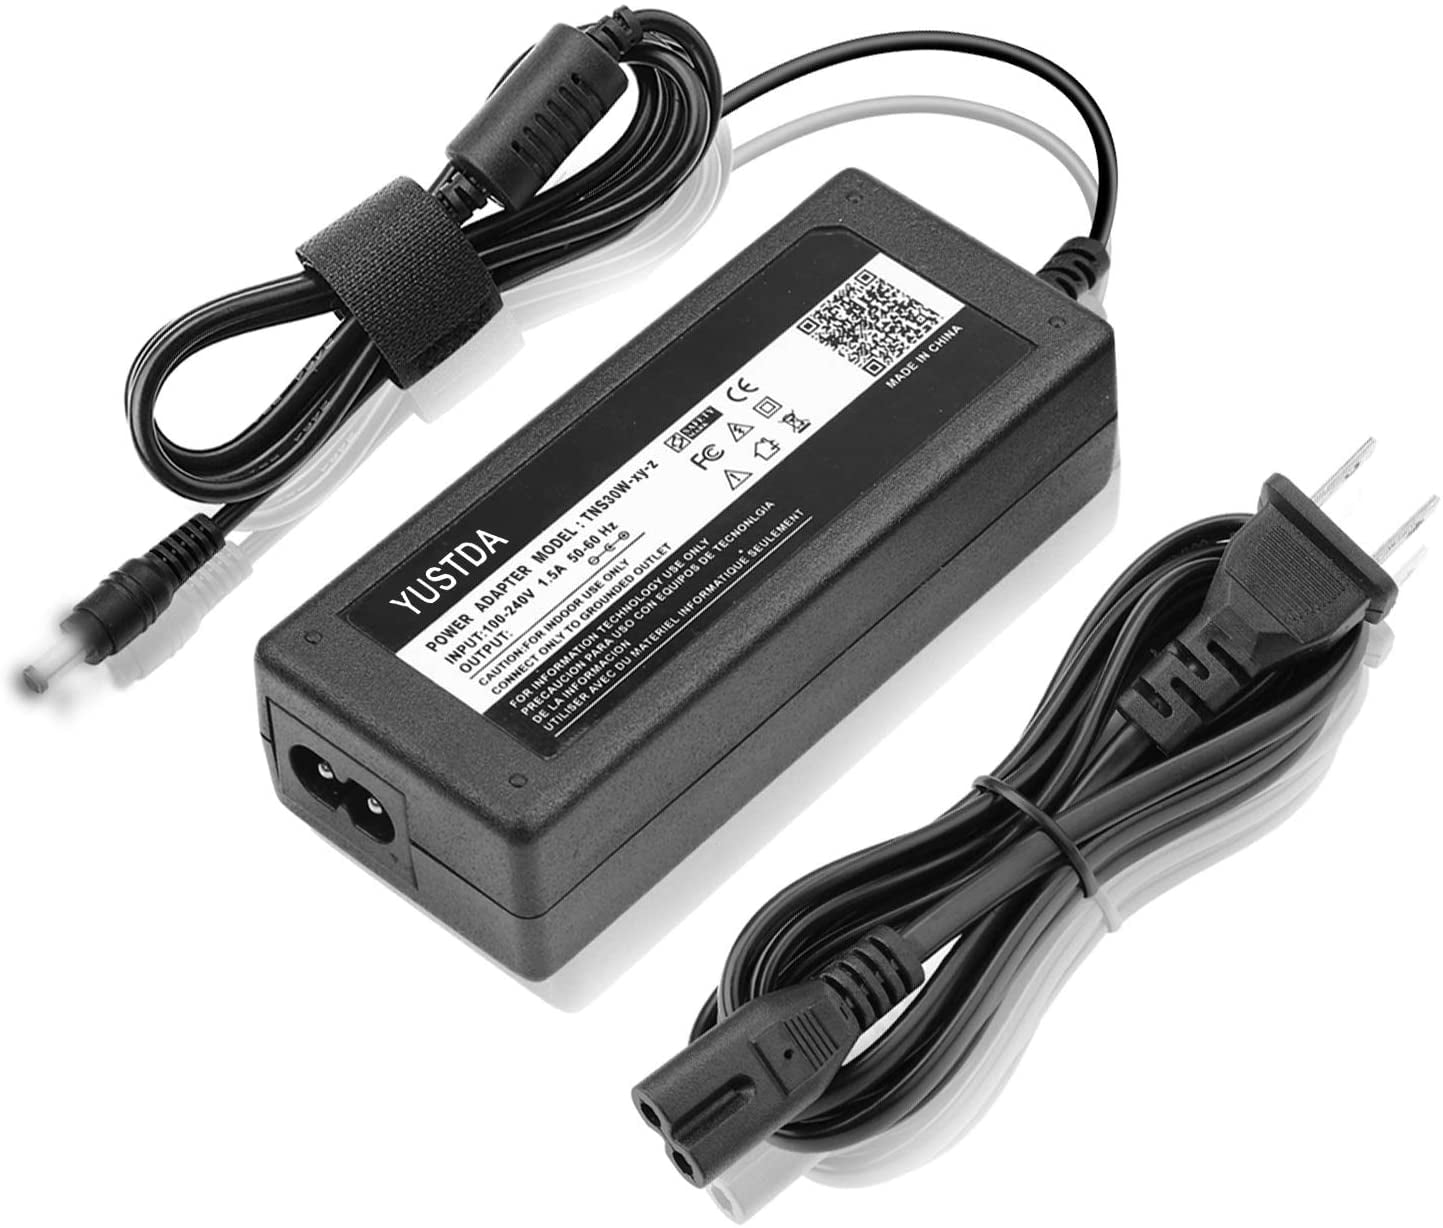 12V 6.6A-7A AC Adapter for Drobo 4-Bay Firewire 800 Storage Power Supply Charger Yustda 10Ft Extra Long 